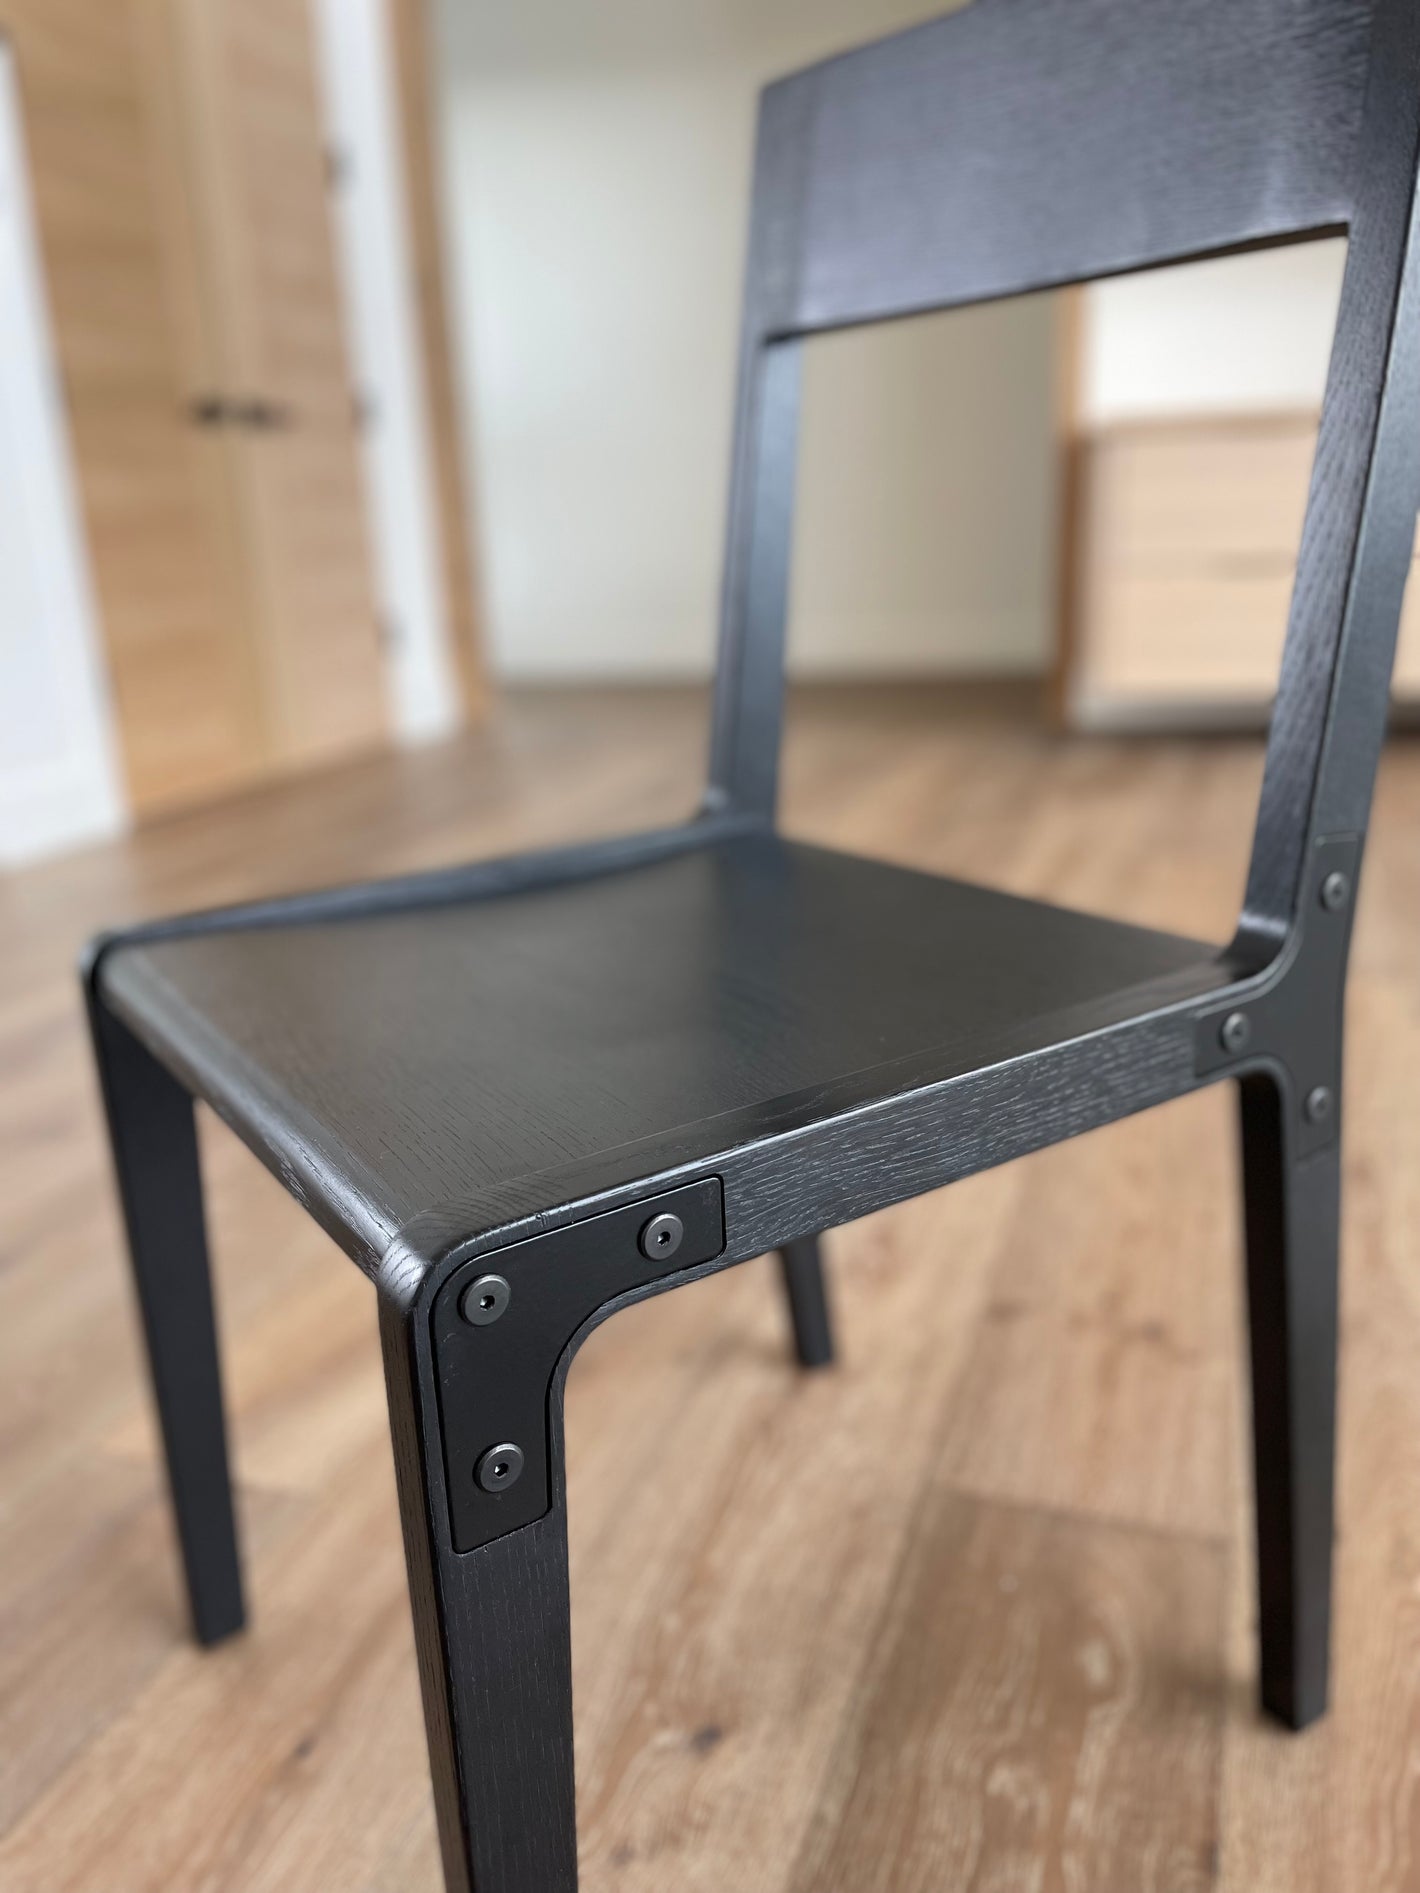 Modern dining chair with minimalistic design. Made from solid white oak and metal with a black hardware oil finish